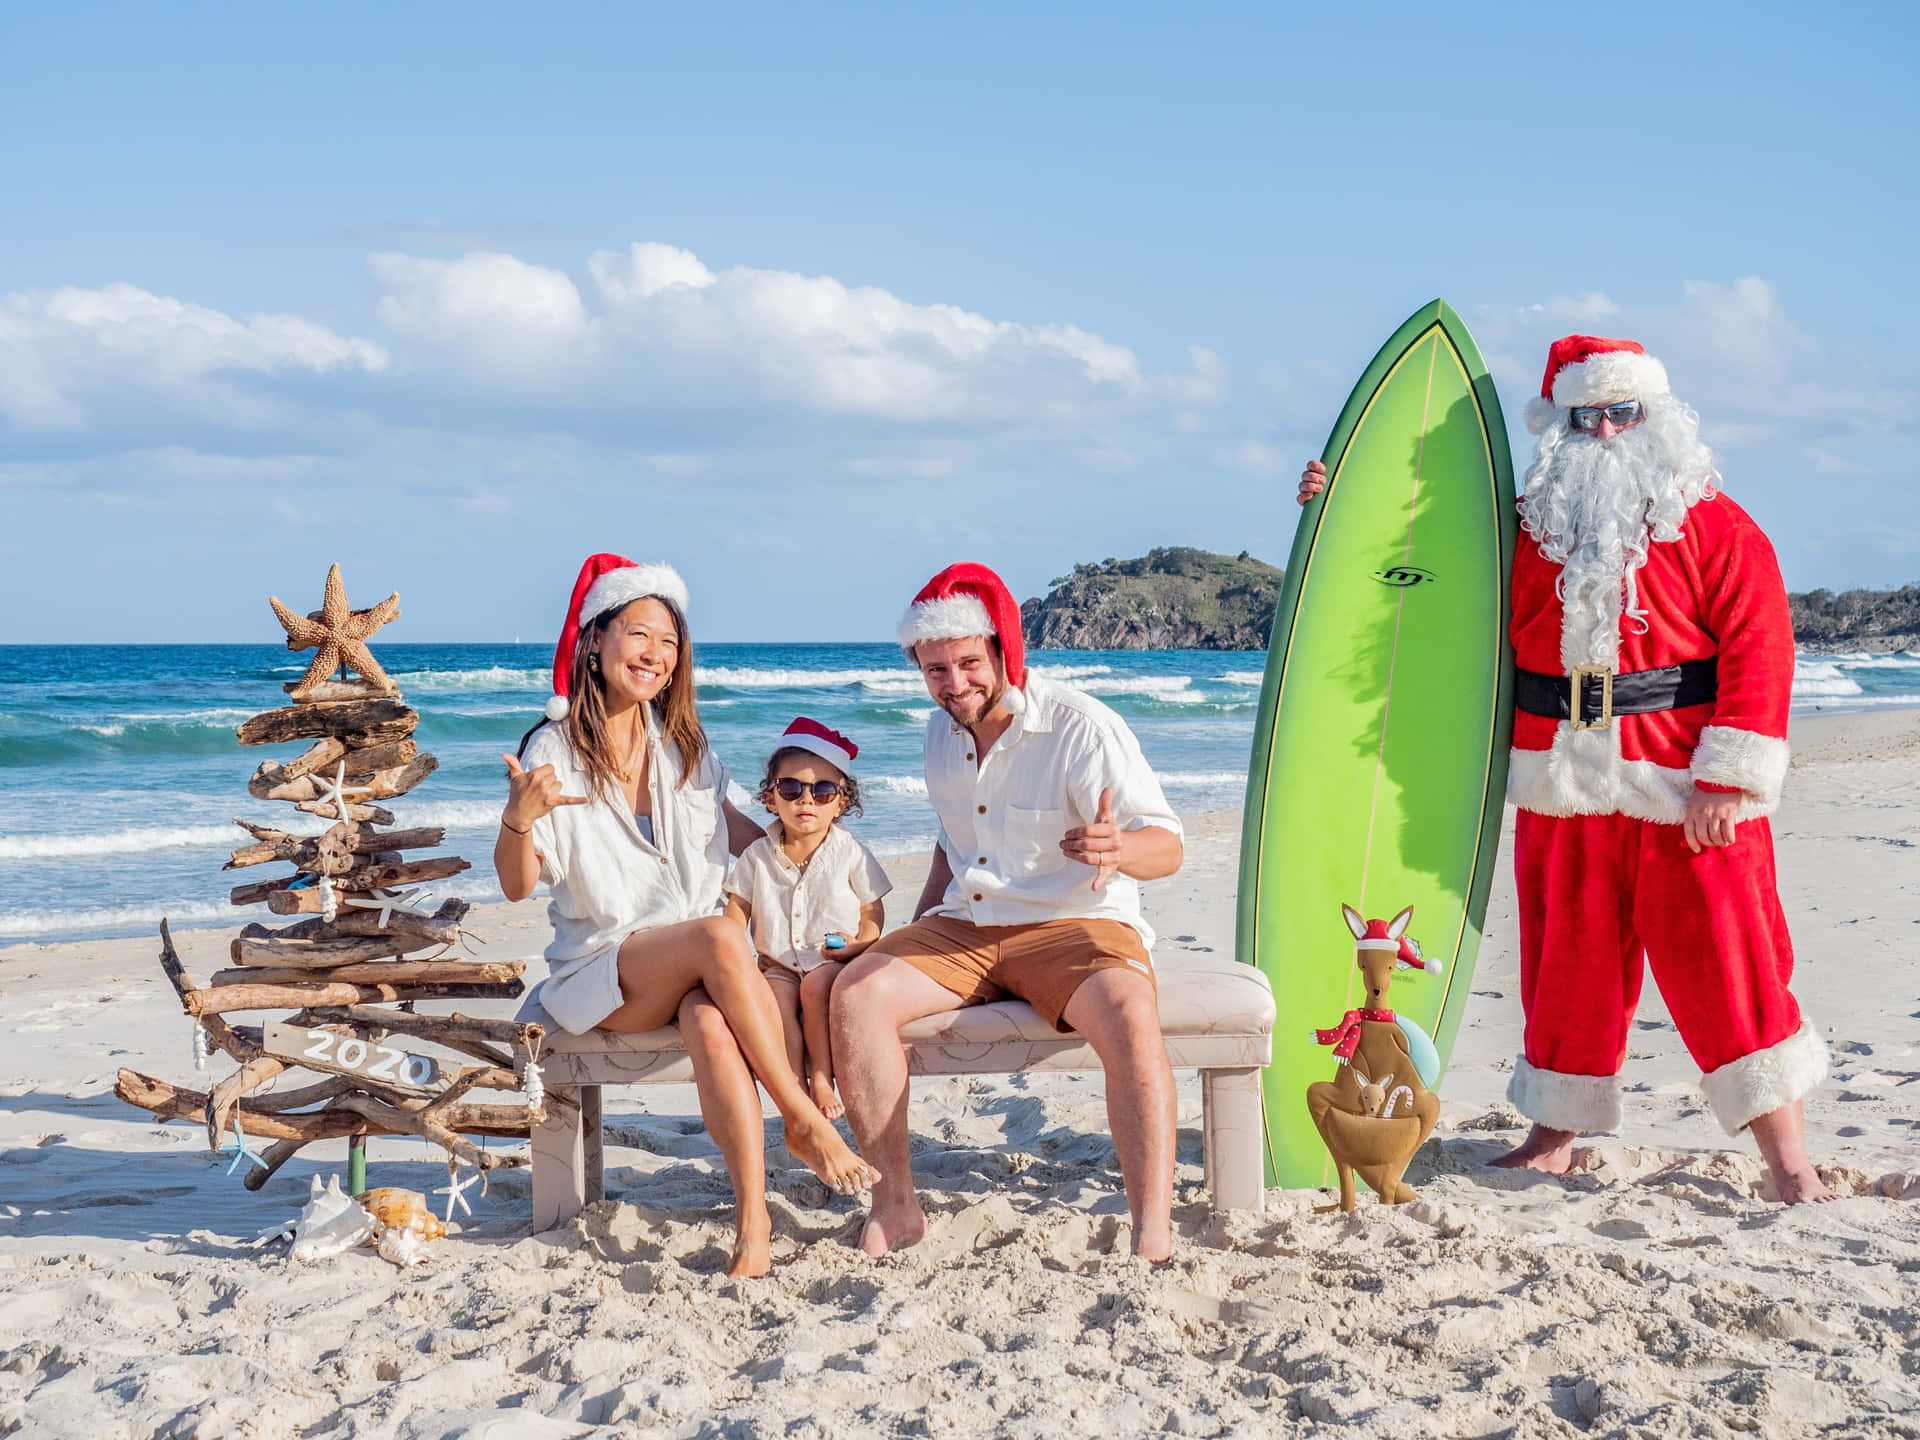 Christmas Family On Beach Pictures